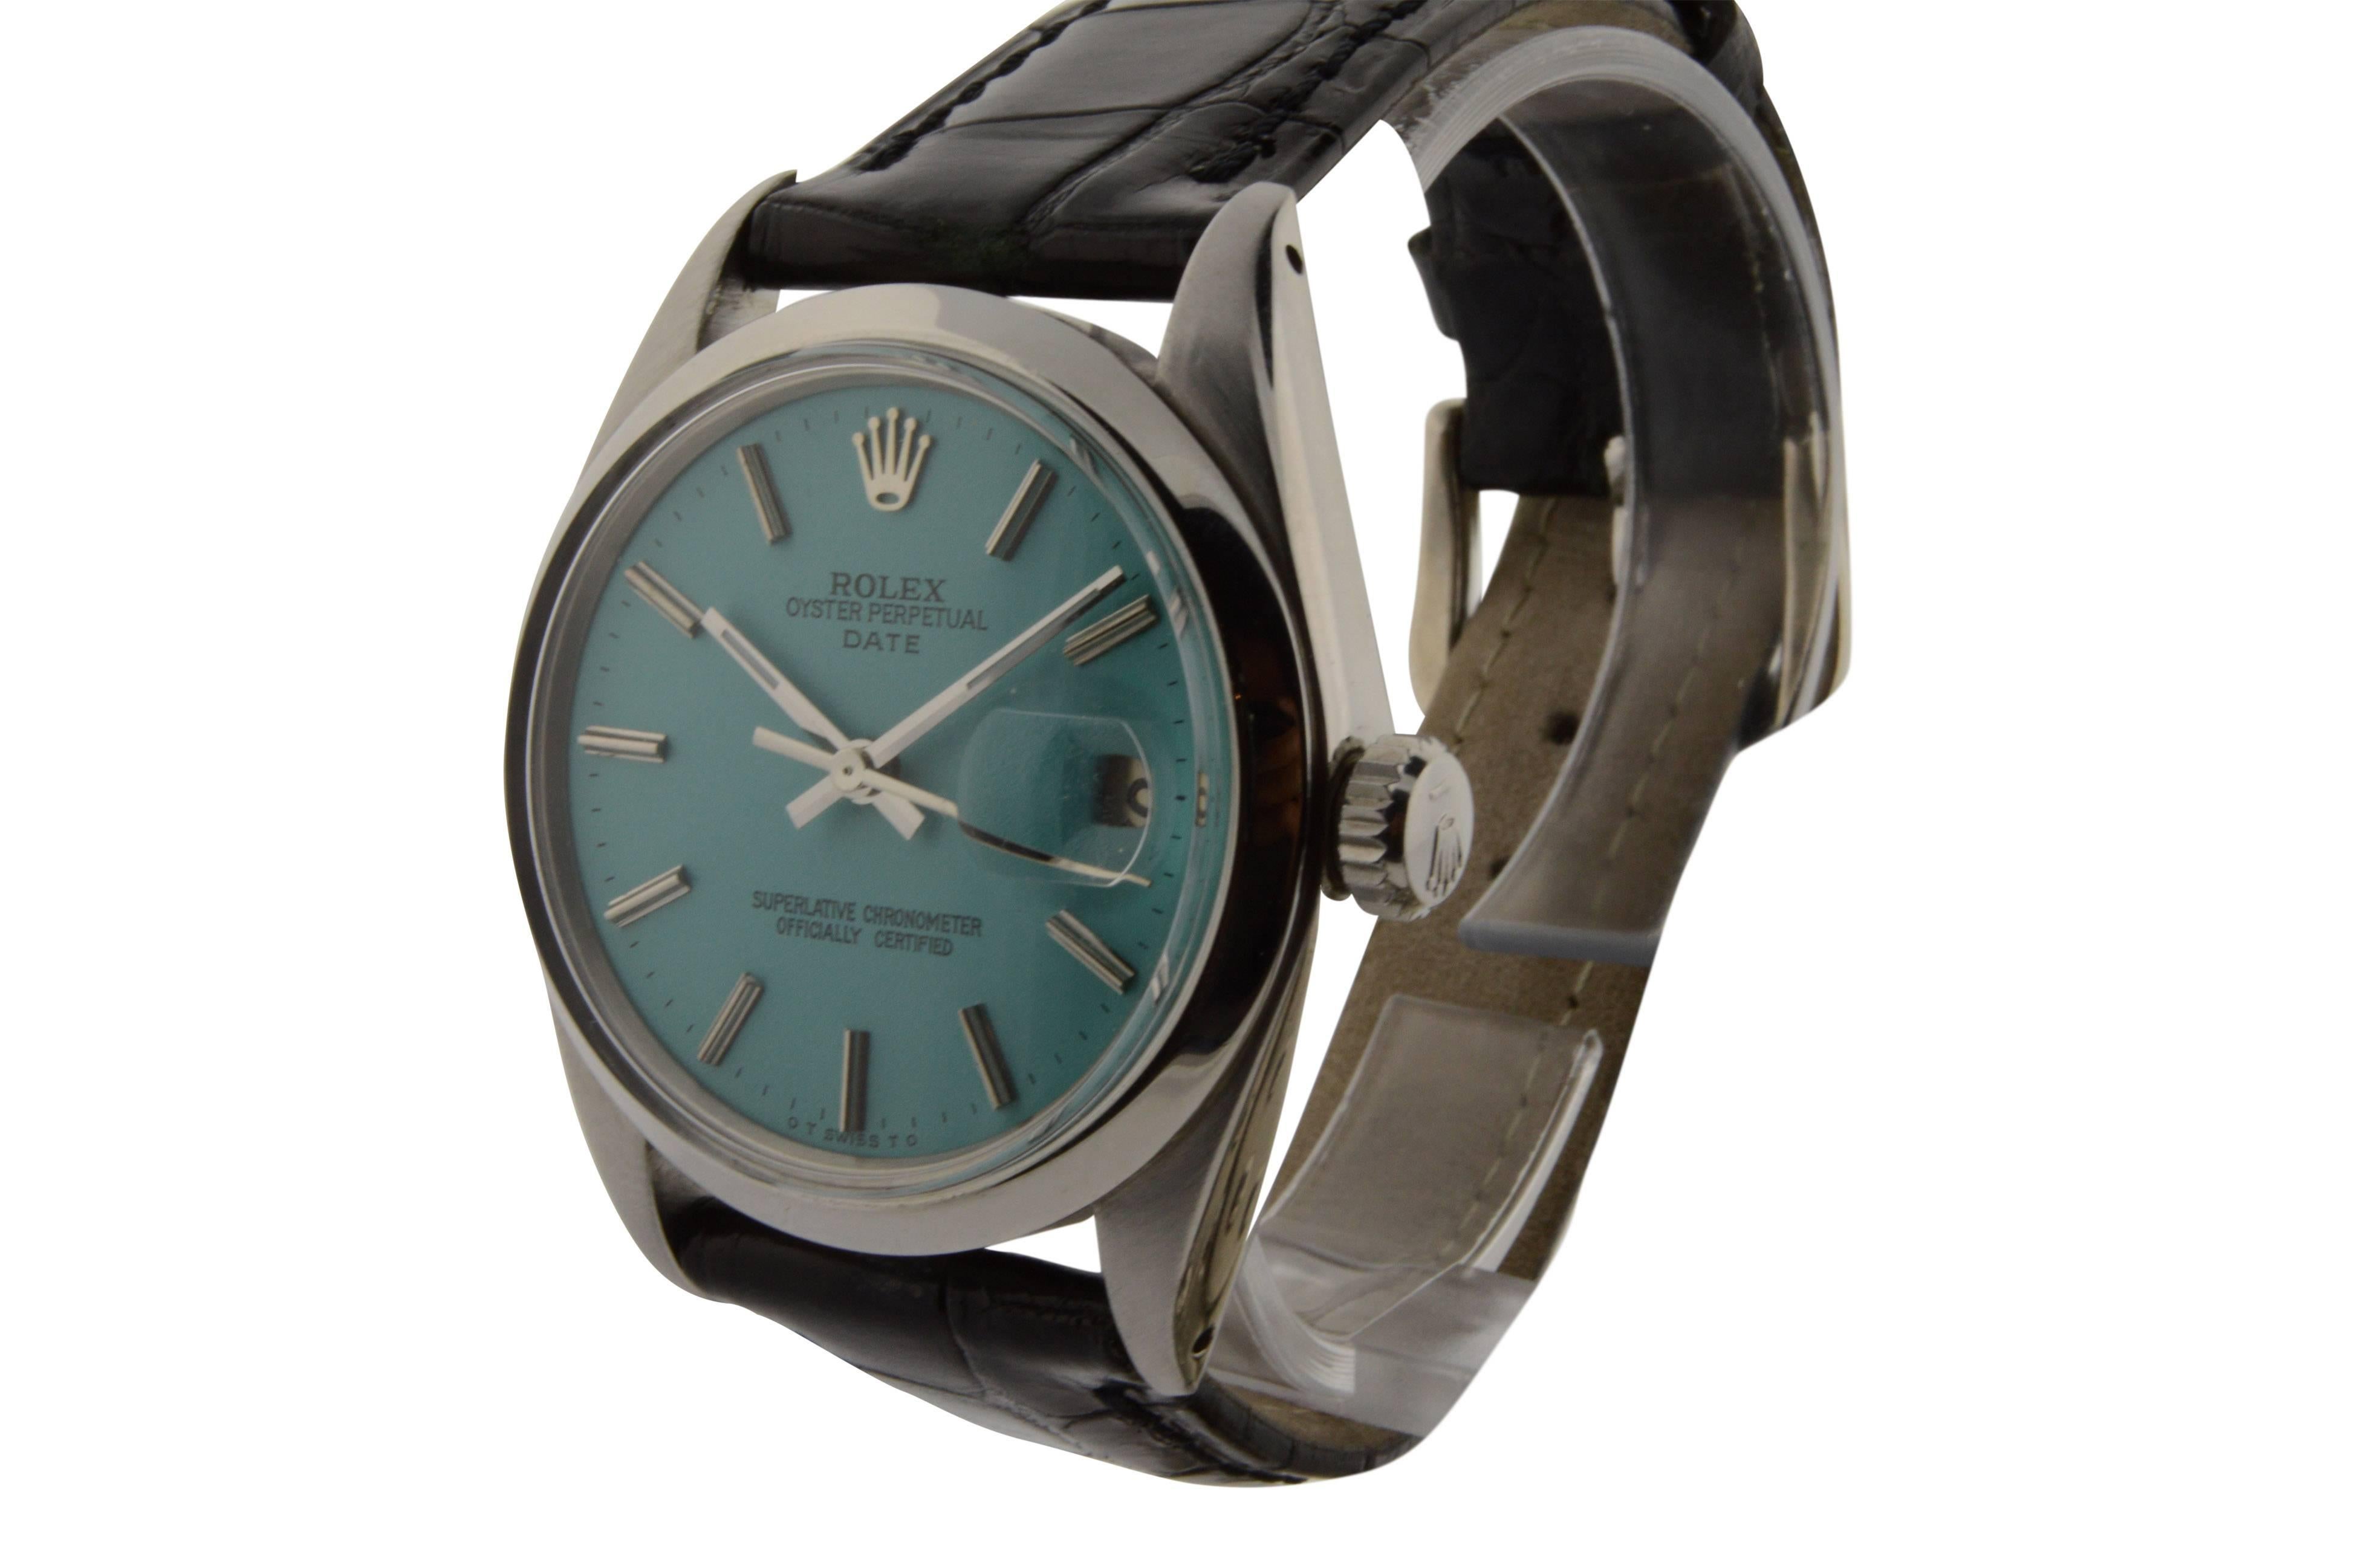 FACTORY / HOUSE:  Rolex Watch Company
STYLE / REFERENCE: Oyster Perpetual Date / Ref. 1500
METAL / MATERIAL: Stainless Steel
DIMENSIONS: 41mm  X  34mm
CIRCA: 1960's
MOVEMENT / CALIBER: 26 Jewels / Cal. 1570
DIAL / HANDS: Blue w/ Batons / Baton